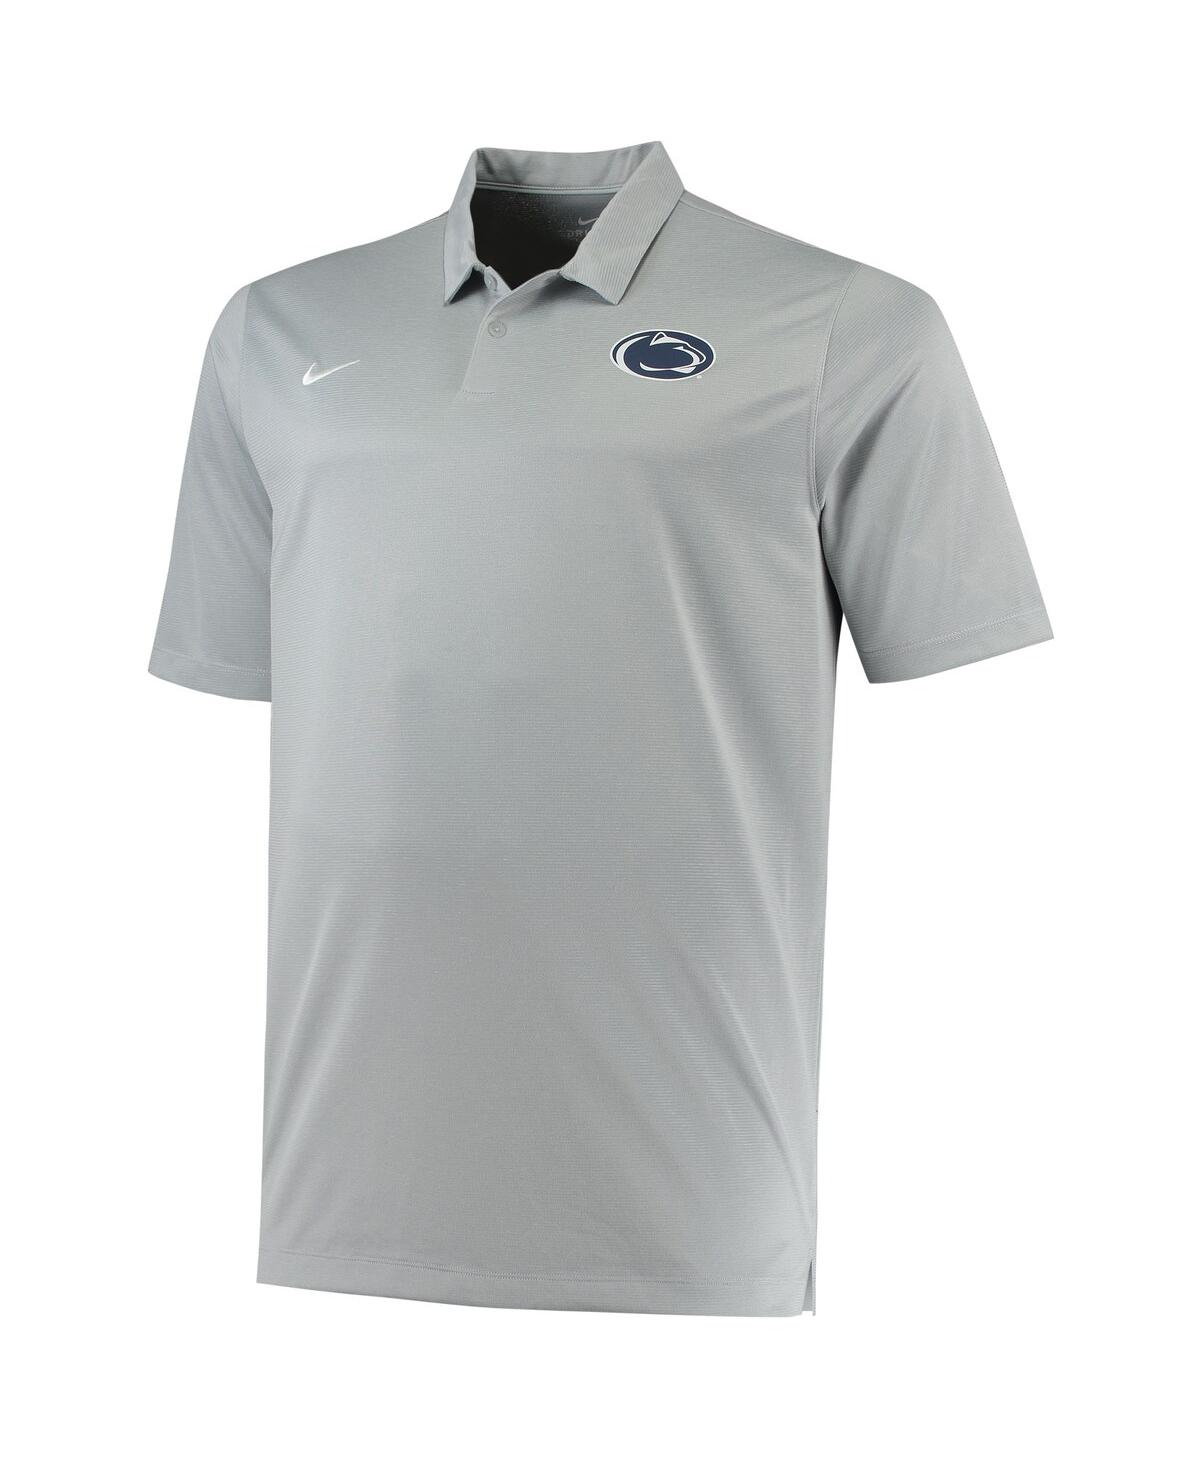 Shop Nike Men's  Heathered Gray Penn State Nittany Lions Big And Tall Performance Polo Shirt